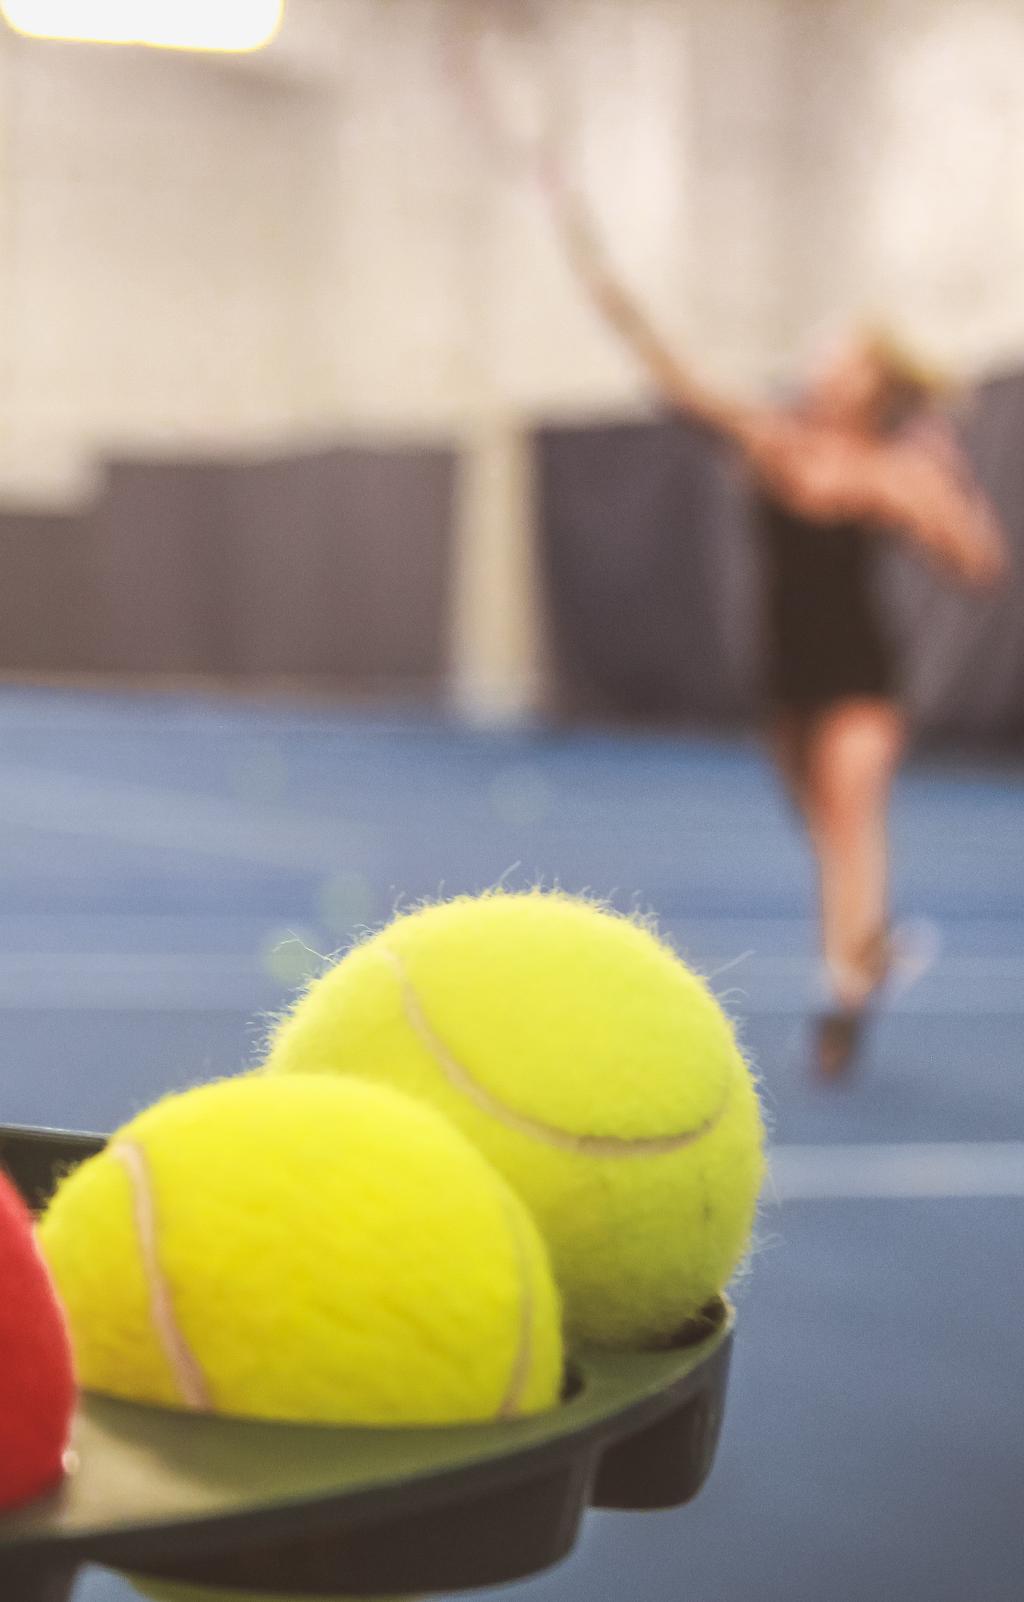 PRIVATE TENNIS LESSONS Members: $50 Comm participant: $65 Need help on specific shots or strategy? Get help in personalized private or semi-private lessons that will take your game to the next level.